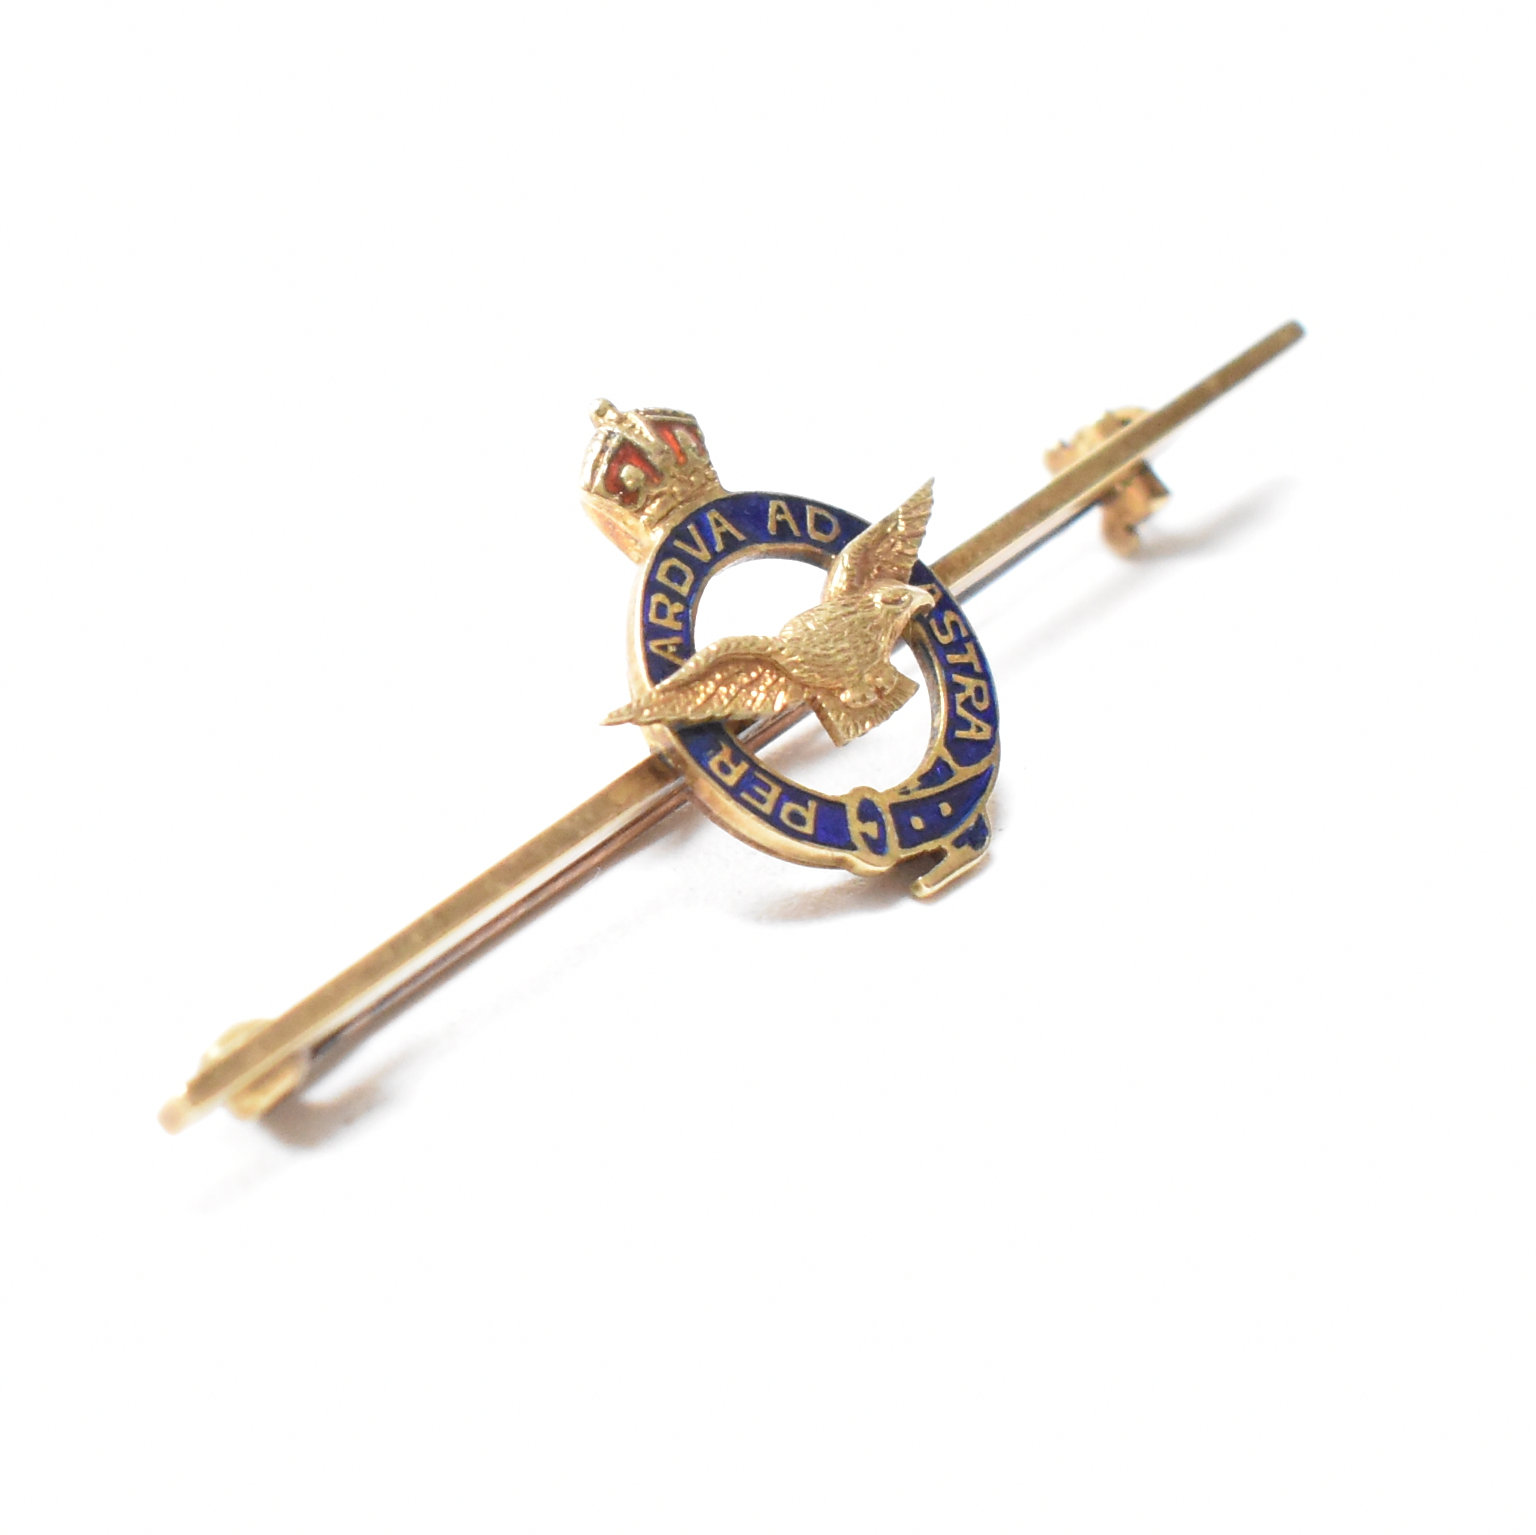 15CT GOLD & ENAMEL MILITARY INTEREST ROYAL AIR FORCE BAR BROOCH - Image 5 of 5